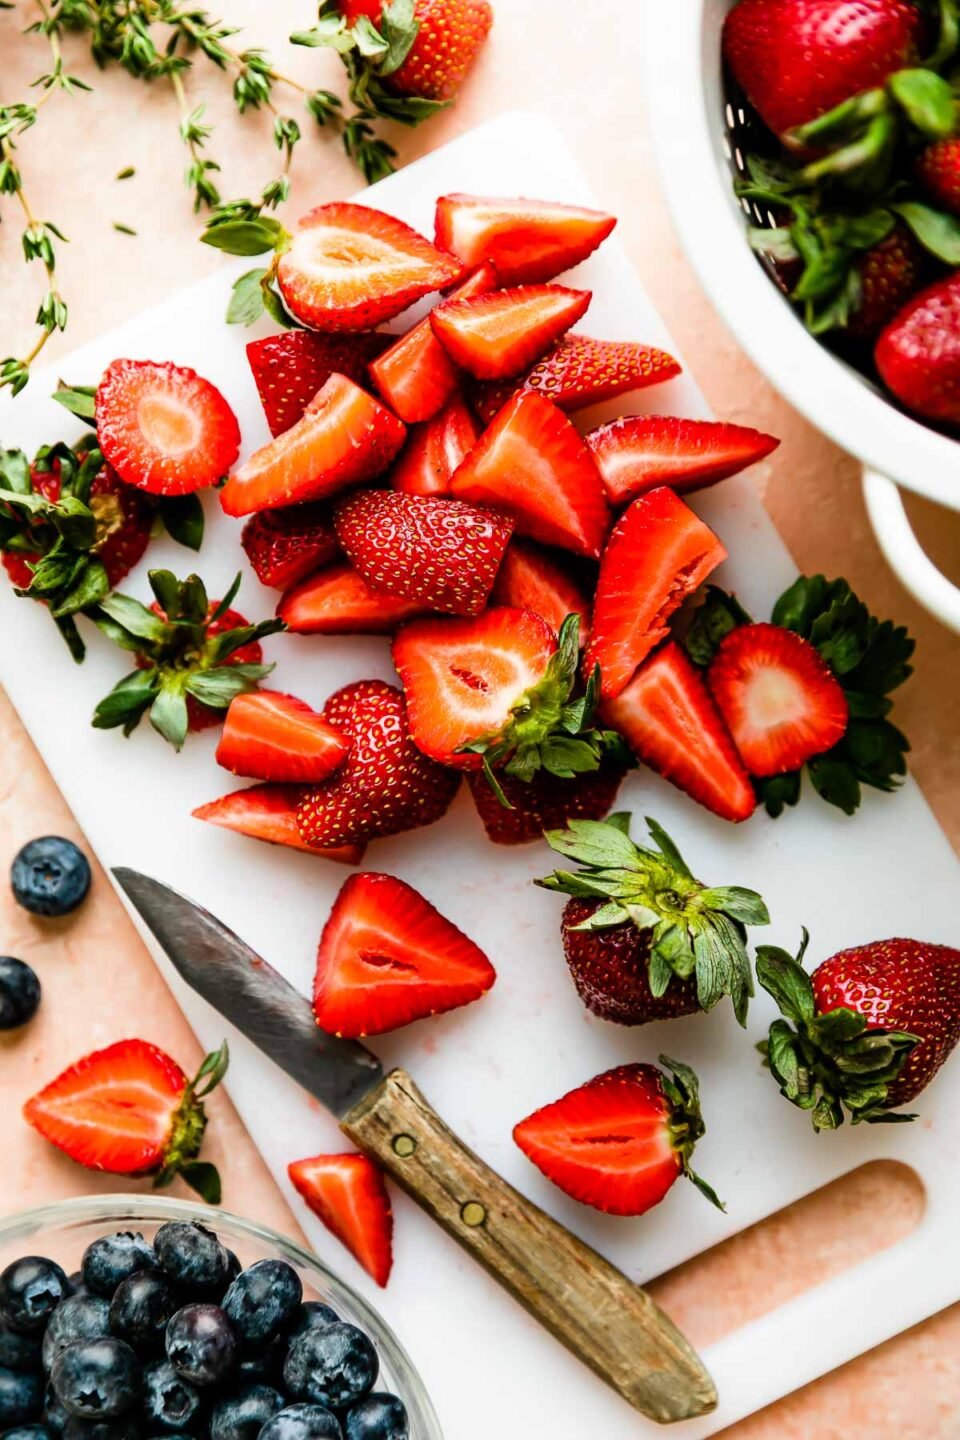 Overhead shot of sliced strawberries on a white cutting board resting on a light pink marbled surface. A bowl of blueberries and a colander of strawberries sit alongside it.